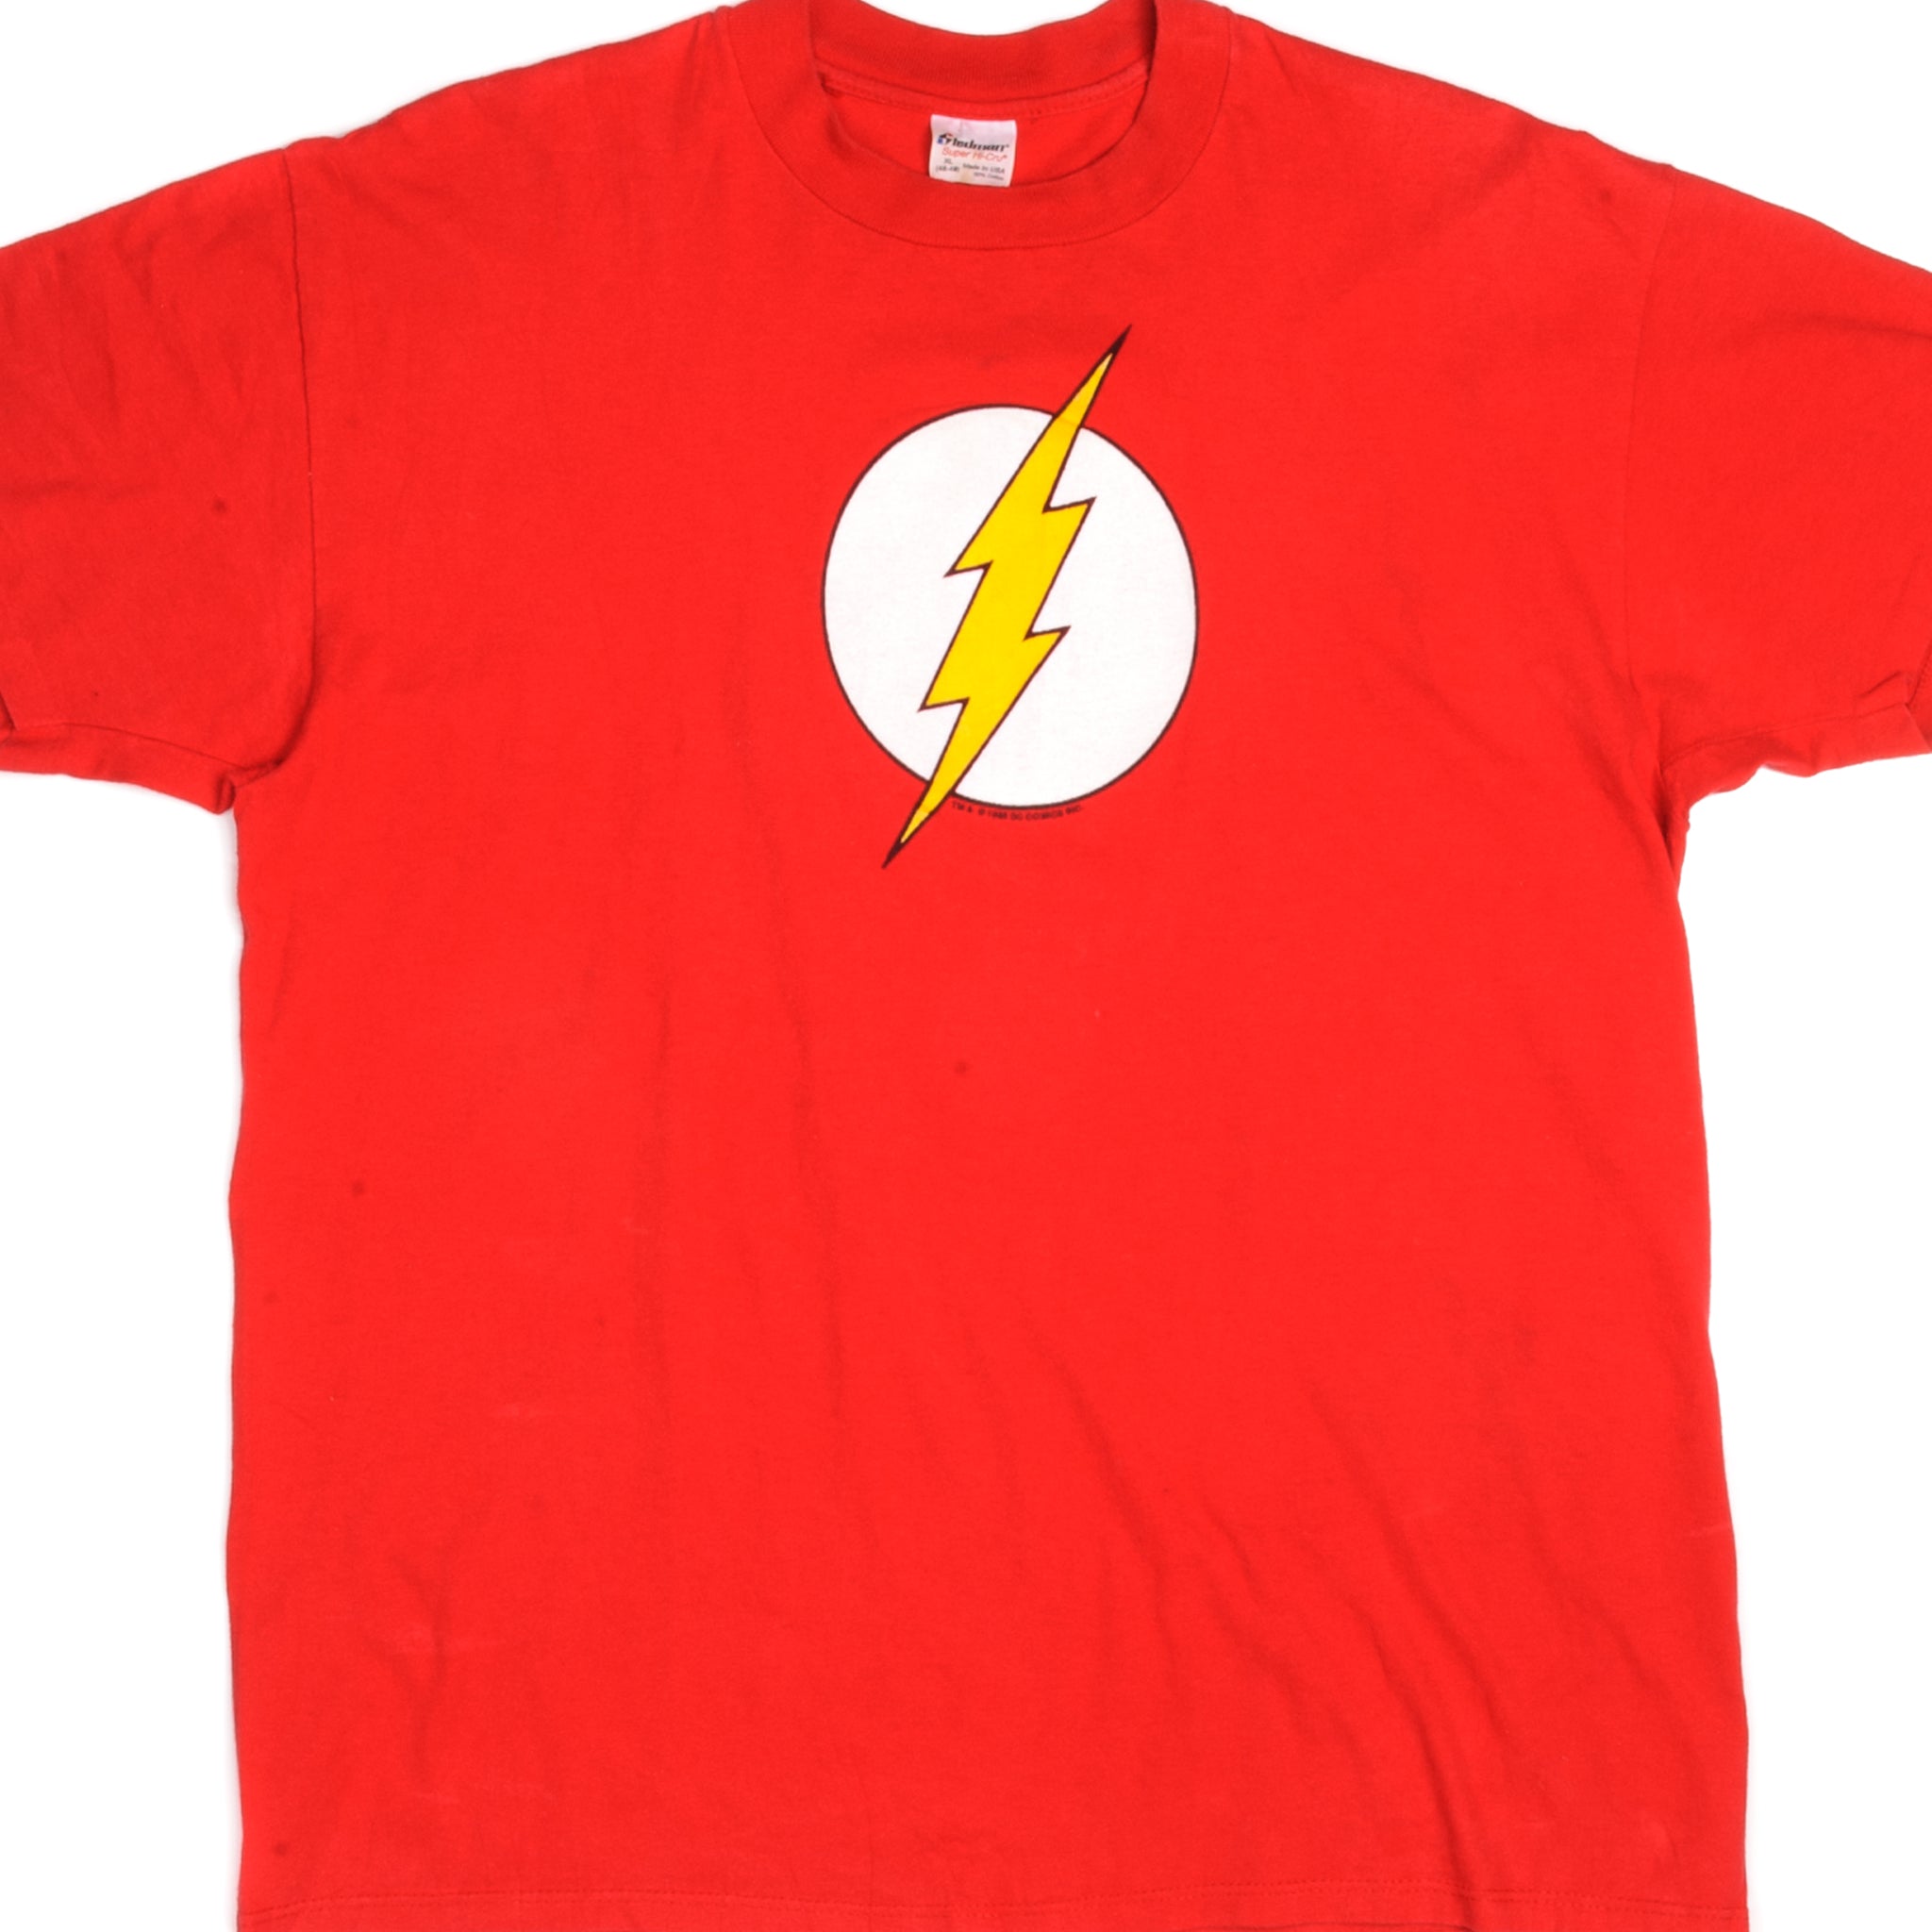 Cusco Ministerie matchmaker VINTAGE THE FLASH DC COMICS TEE SHIRT 1988 SIZE LARGE MADE IN USA – Vintage  rare usa